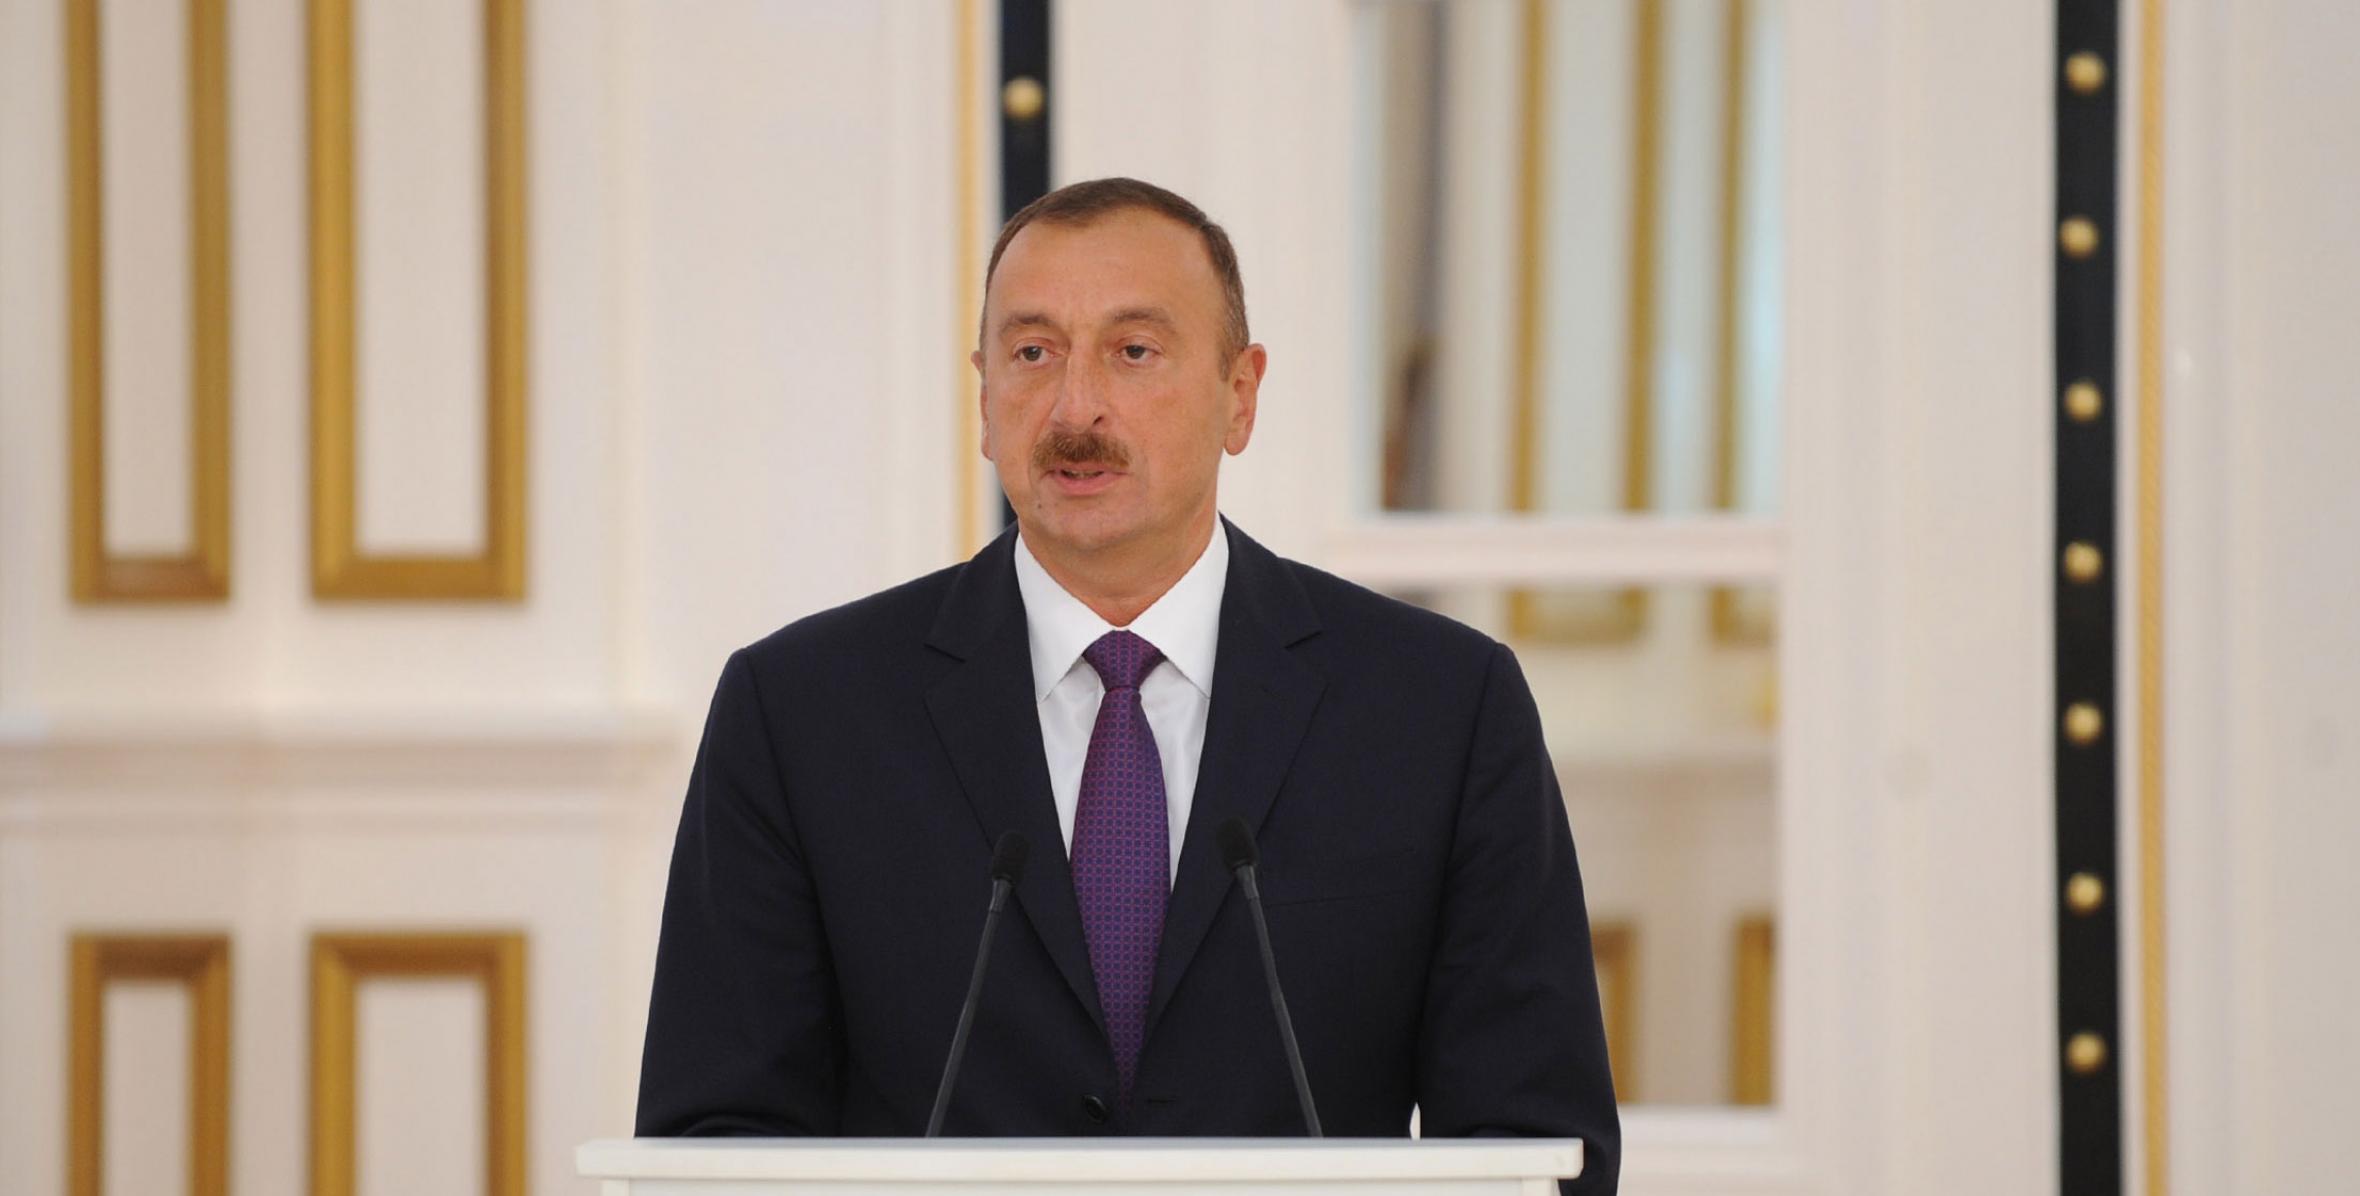 Ilham Aliyev participated in the Iftar ceremony on the occasion of the holy month of Ramadan